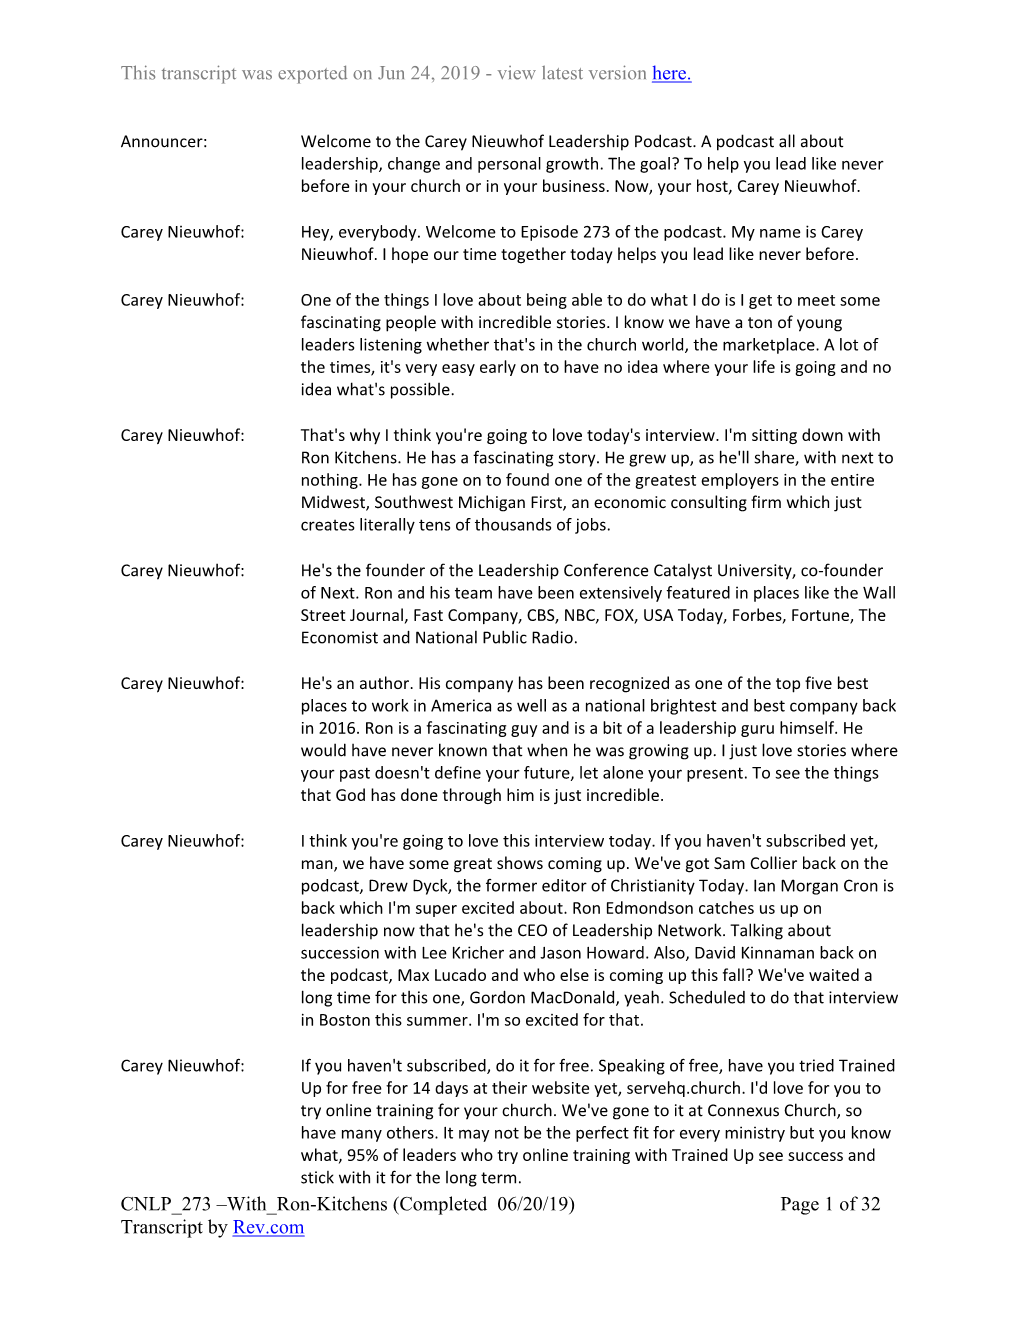 With Ron-Kitchens (Completed 06/20/19) Page 1 of 32 Transcript by Rev.Com This Transcript Was Exported on Jun 24, 2019 - View Latest Version Here